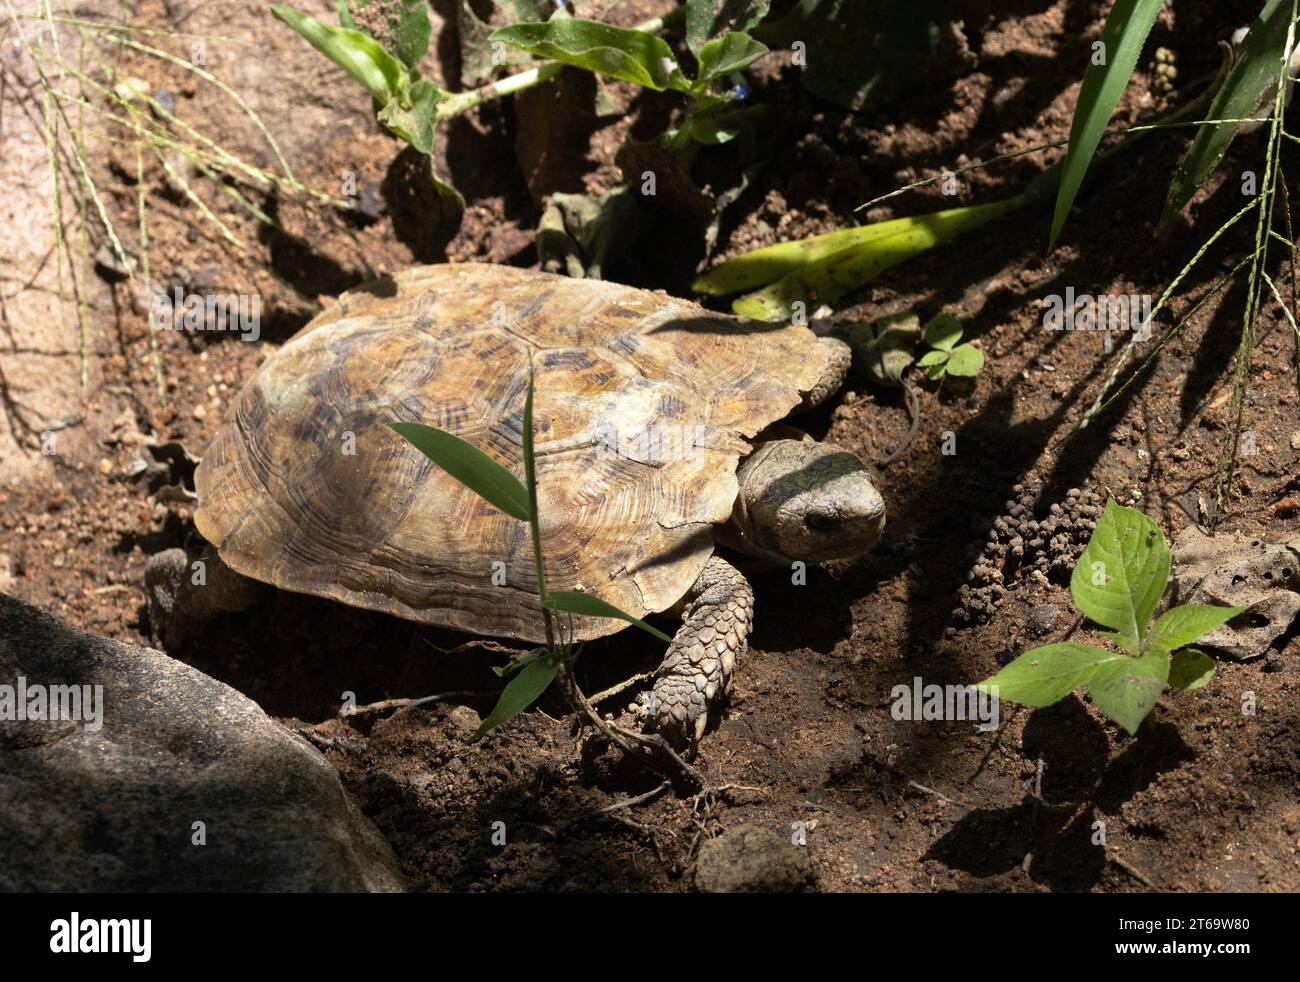 The endemic Pancake Tortoise is only found in a few areas of rocky outcrops in East Africa. The wild population has been seriously reduced. Stock Photo